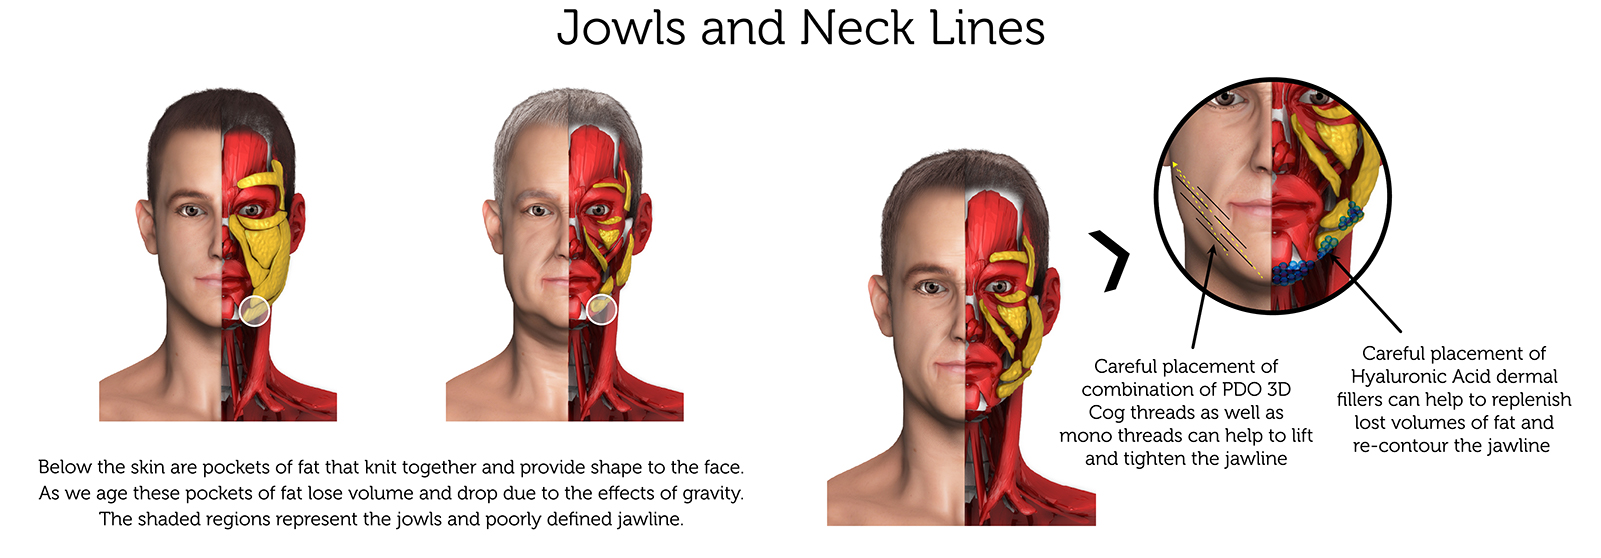 Jowls and Neck Lines (Male) a-01